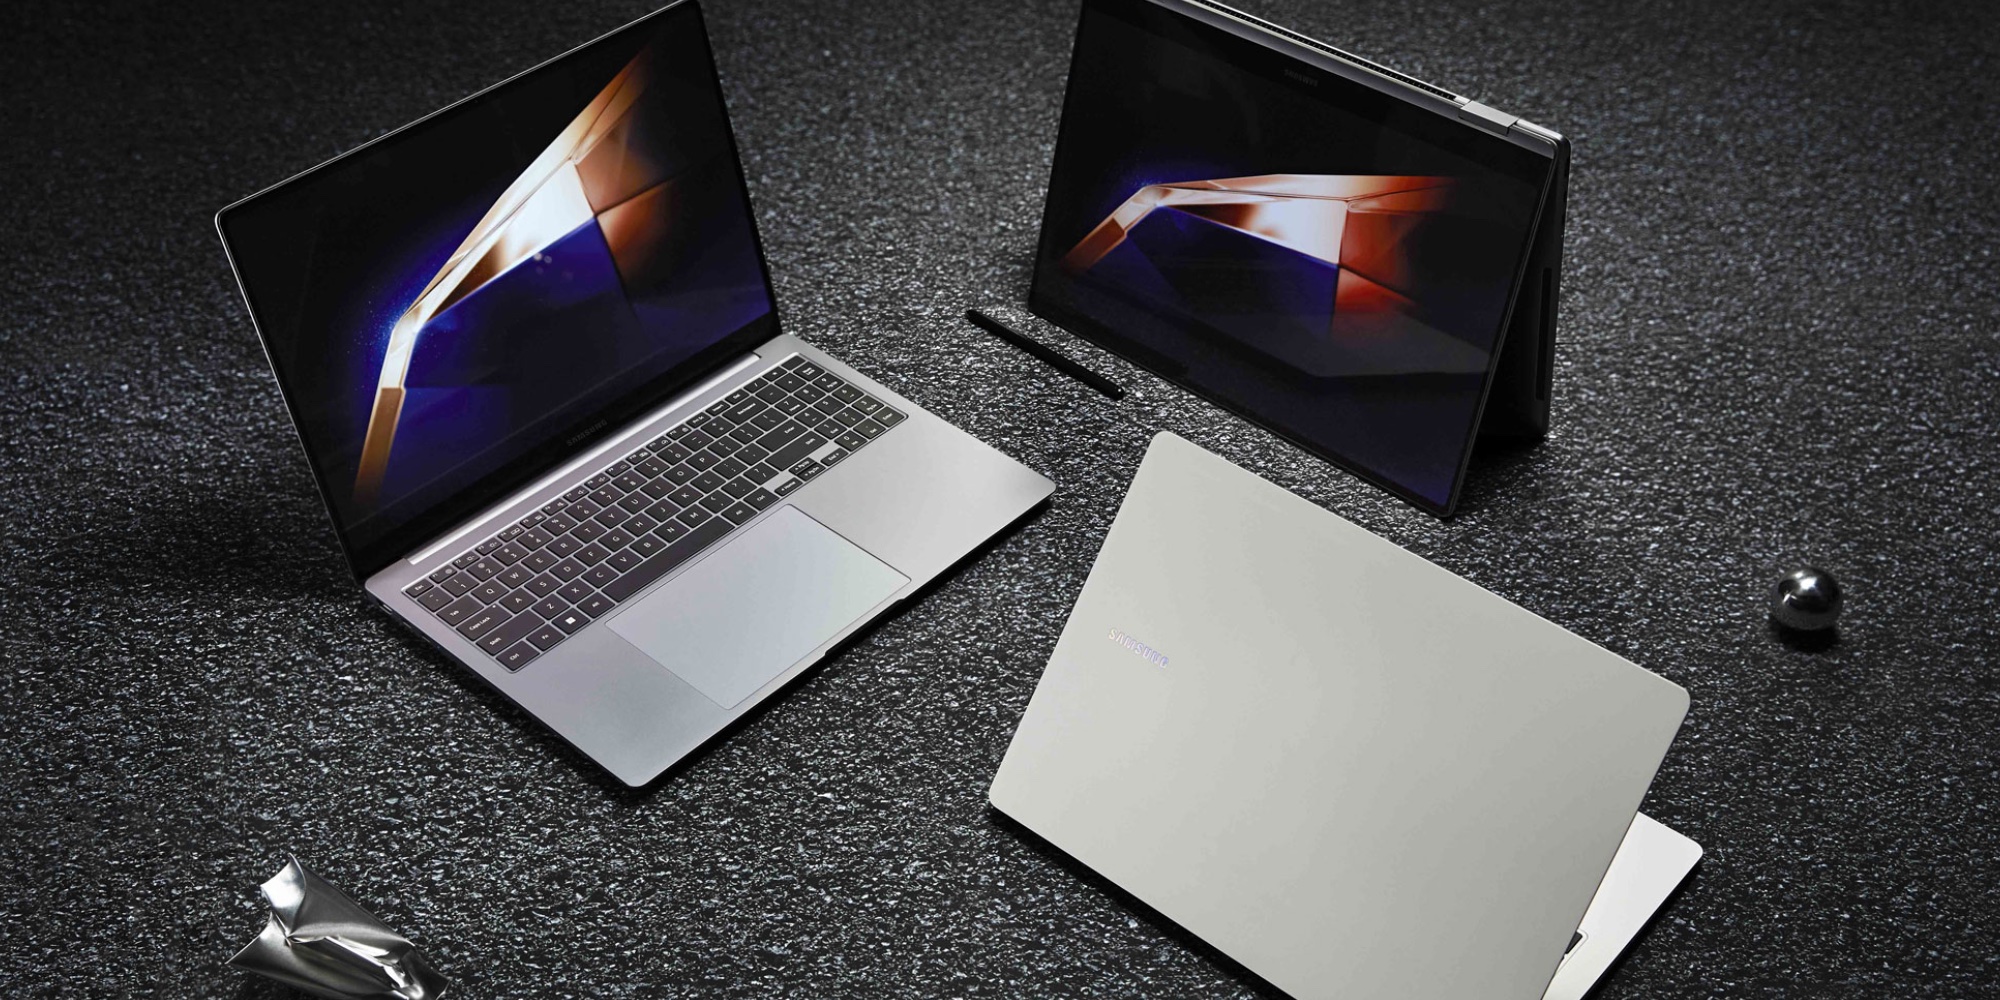 Samsung Galaxy Book 4 laptops are now available